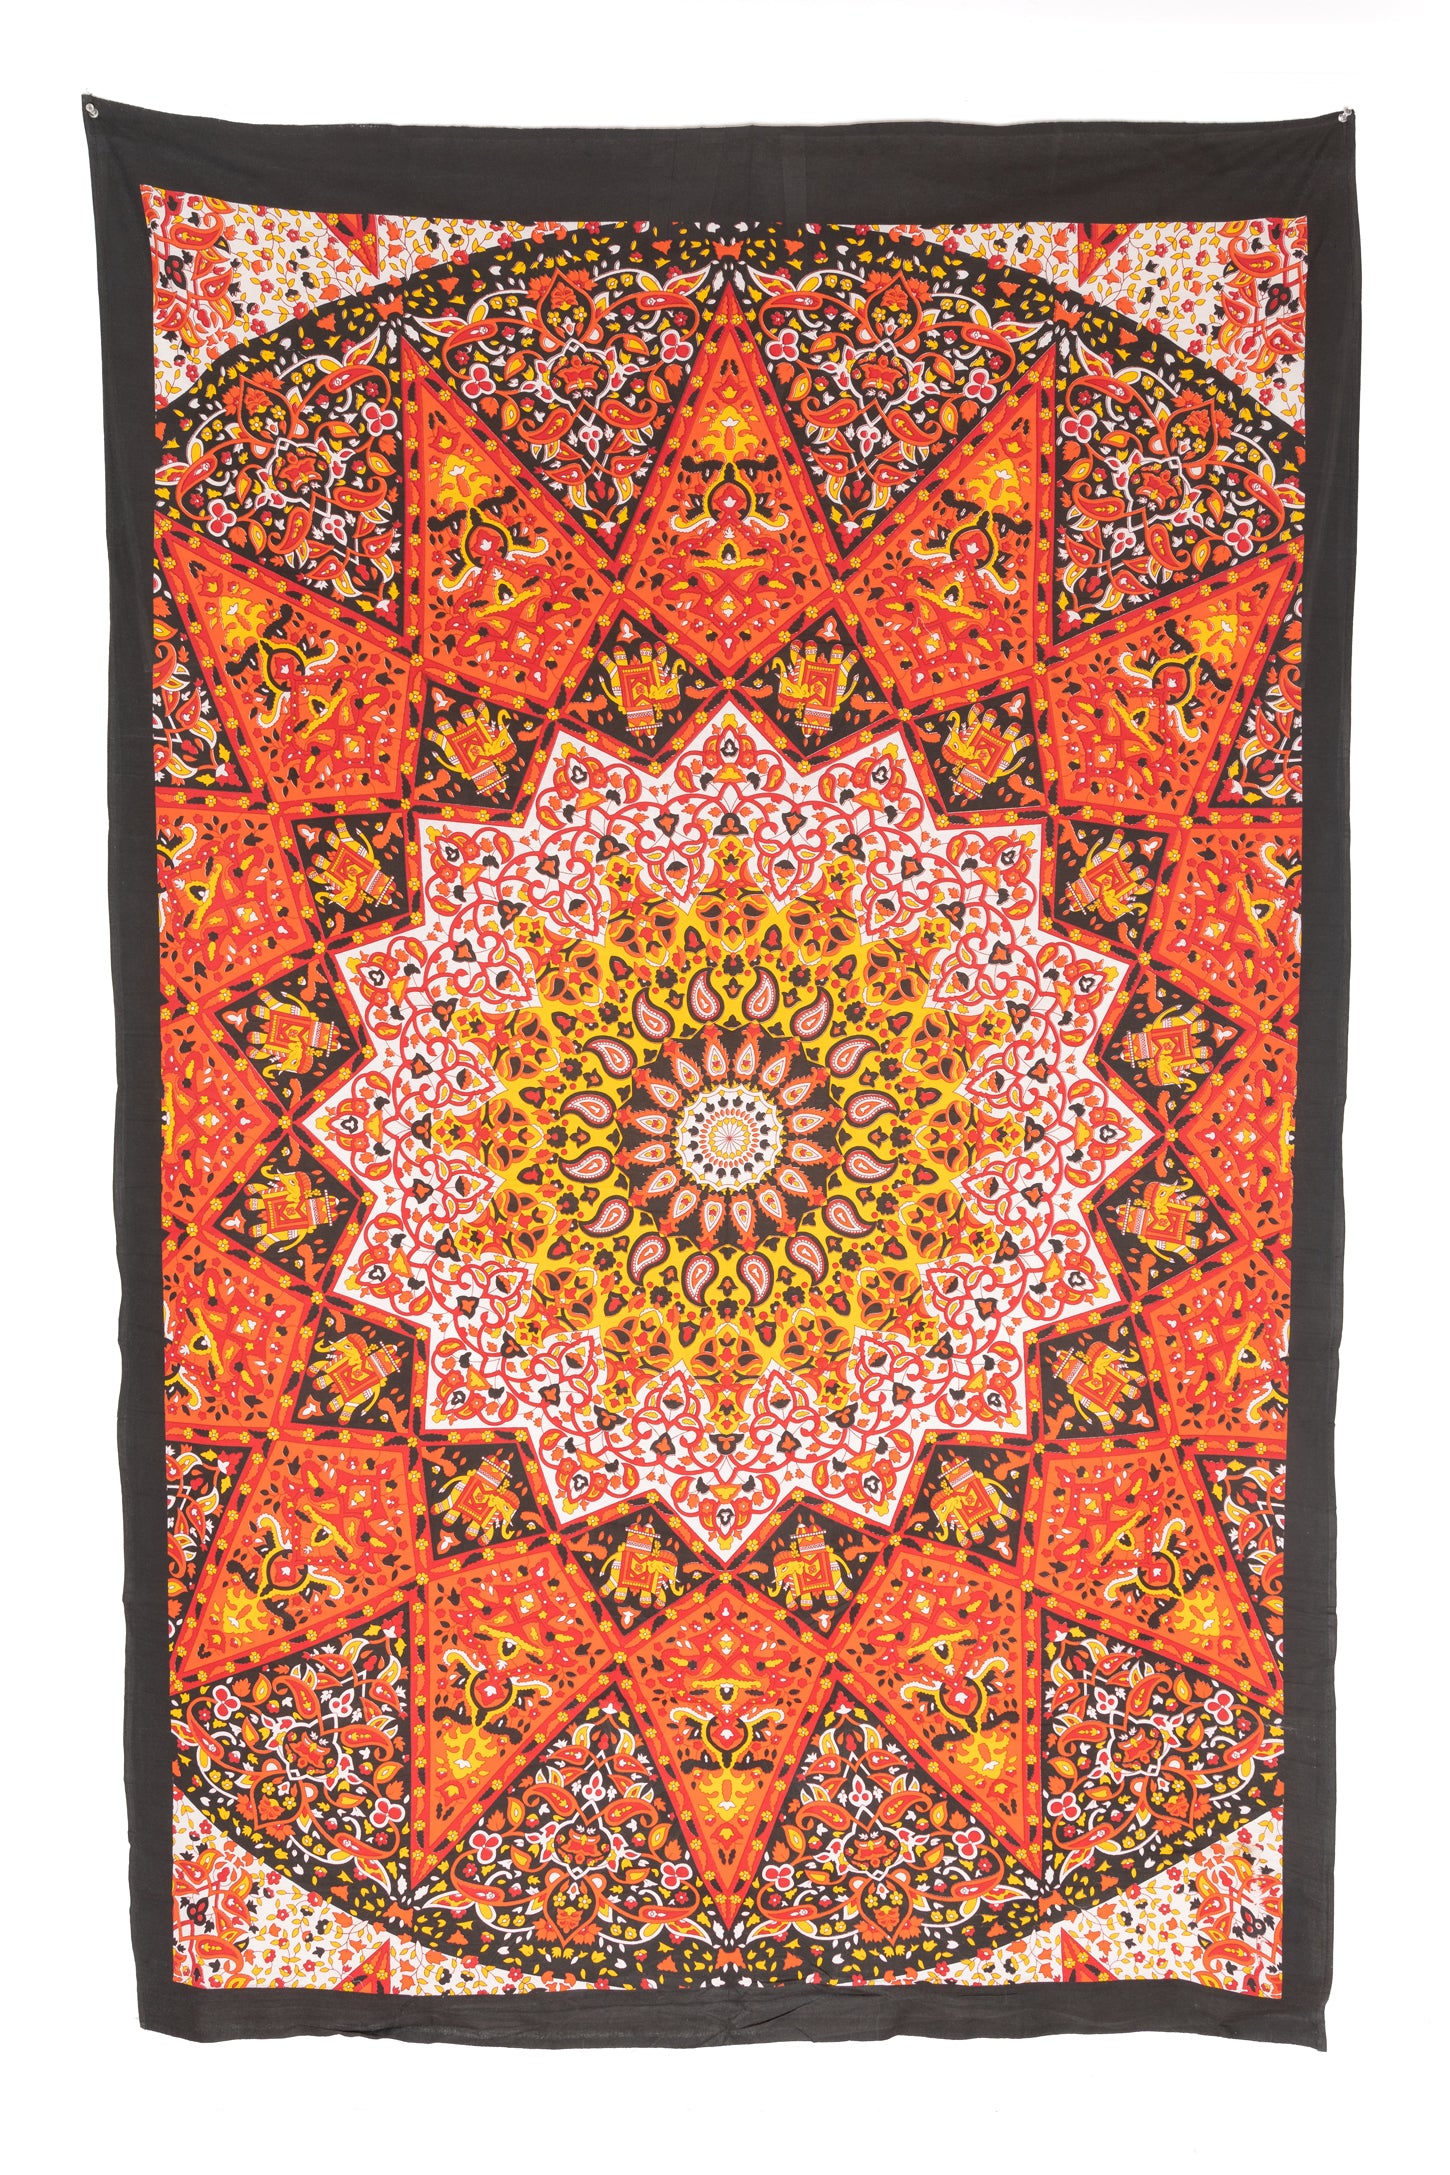 https://www.mexicaliblues.com/cdn/shop/products/Star_Mandala_Tapestry_Black_and_Red.jpg?v=1635448256&width=1920